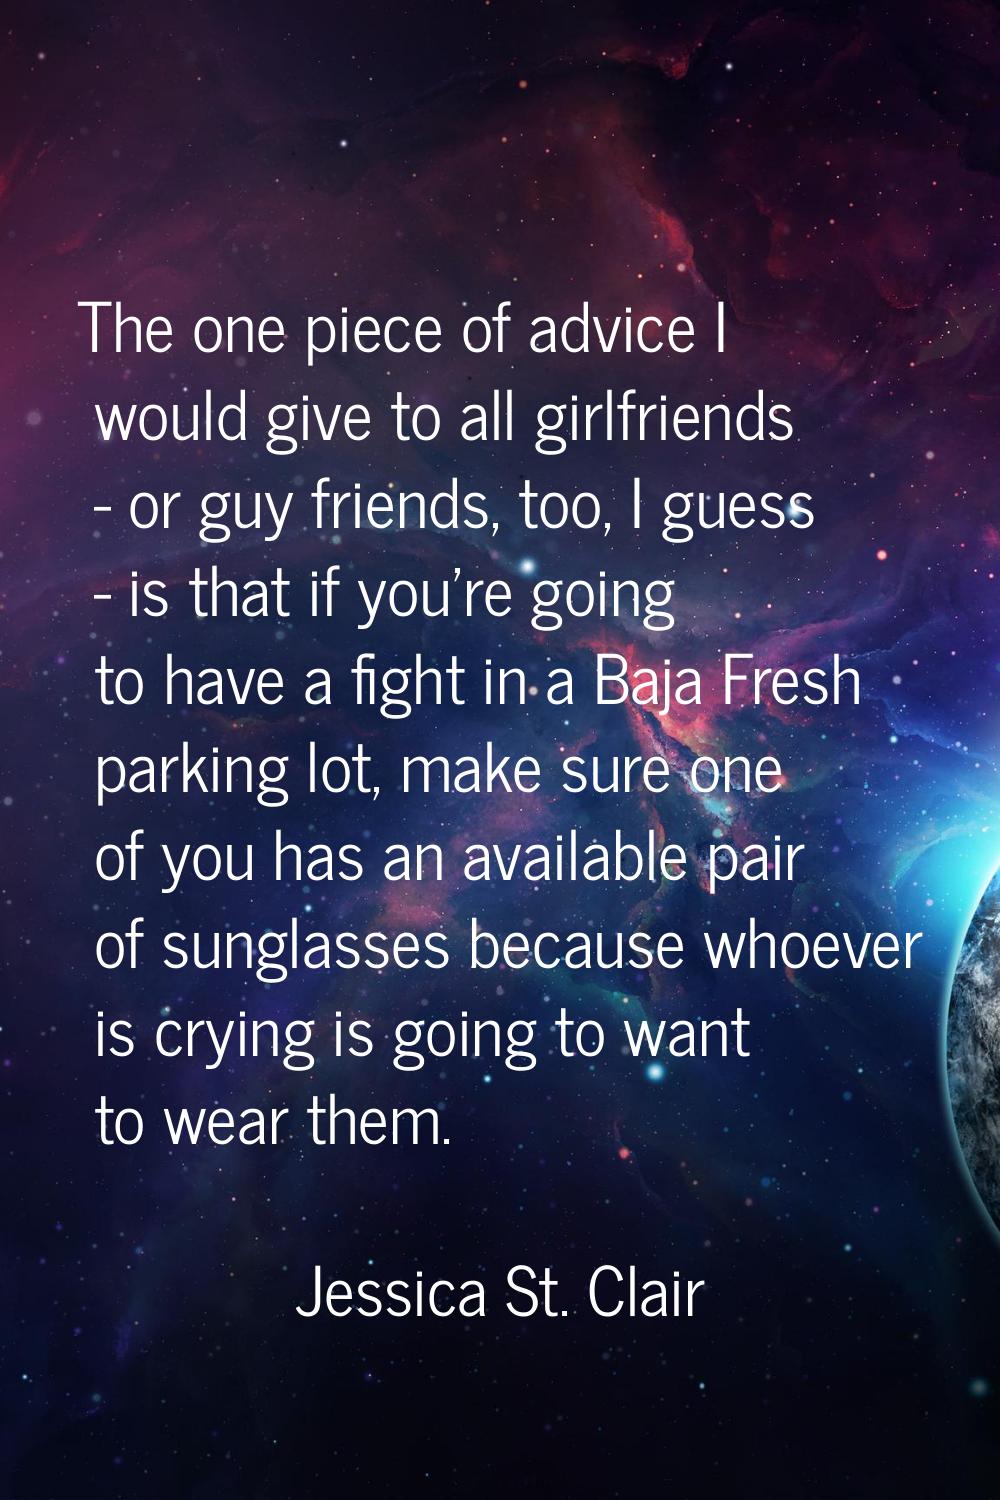 The one piece of advice I would give to all girlfriends - or guy friends, too, I guess - is that if